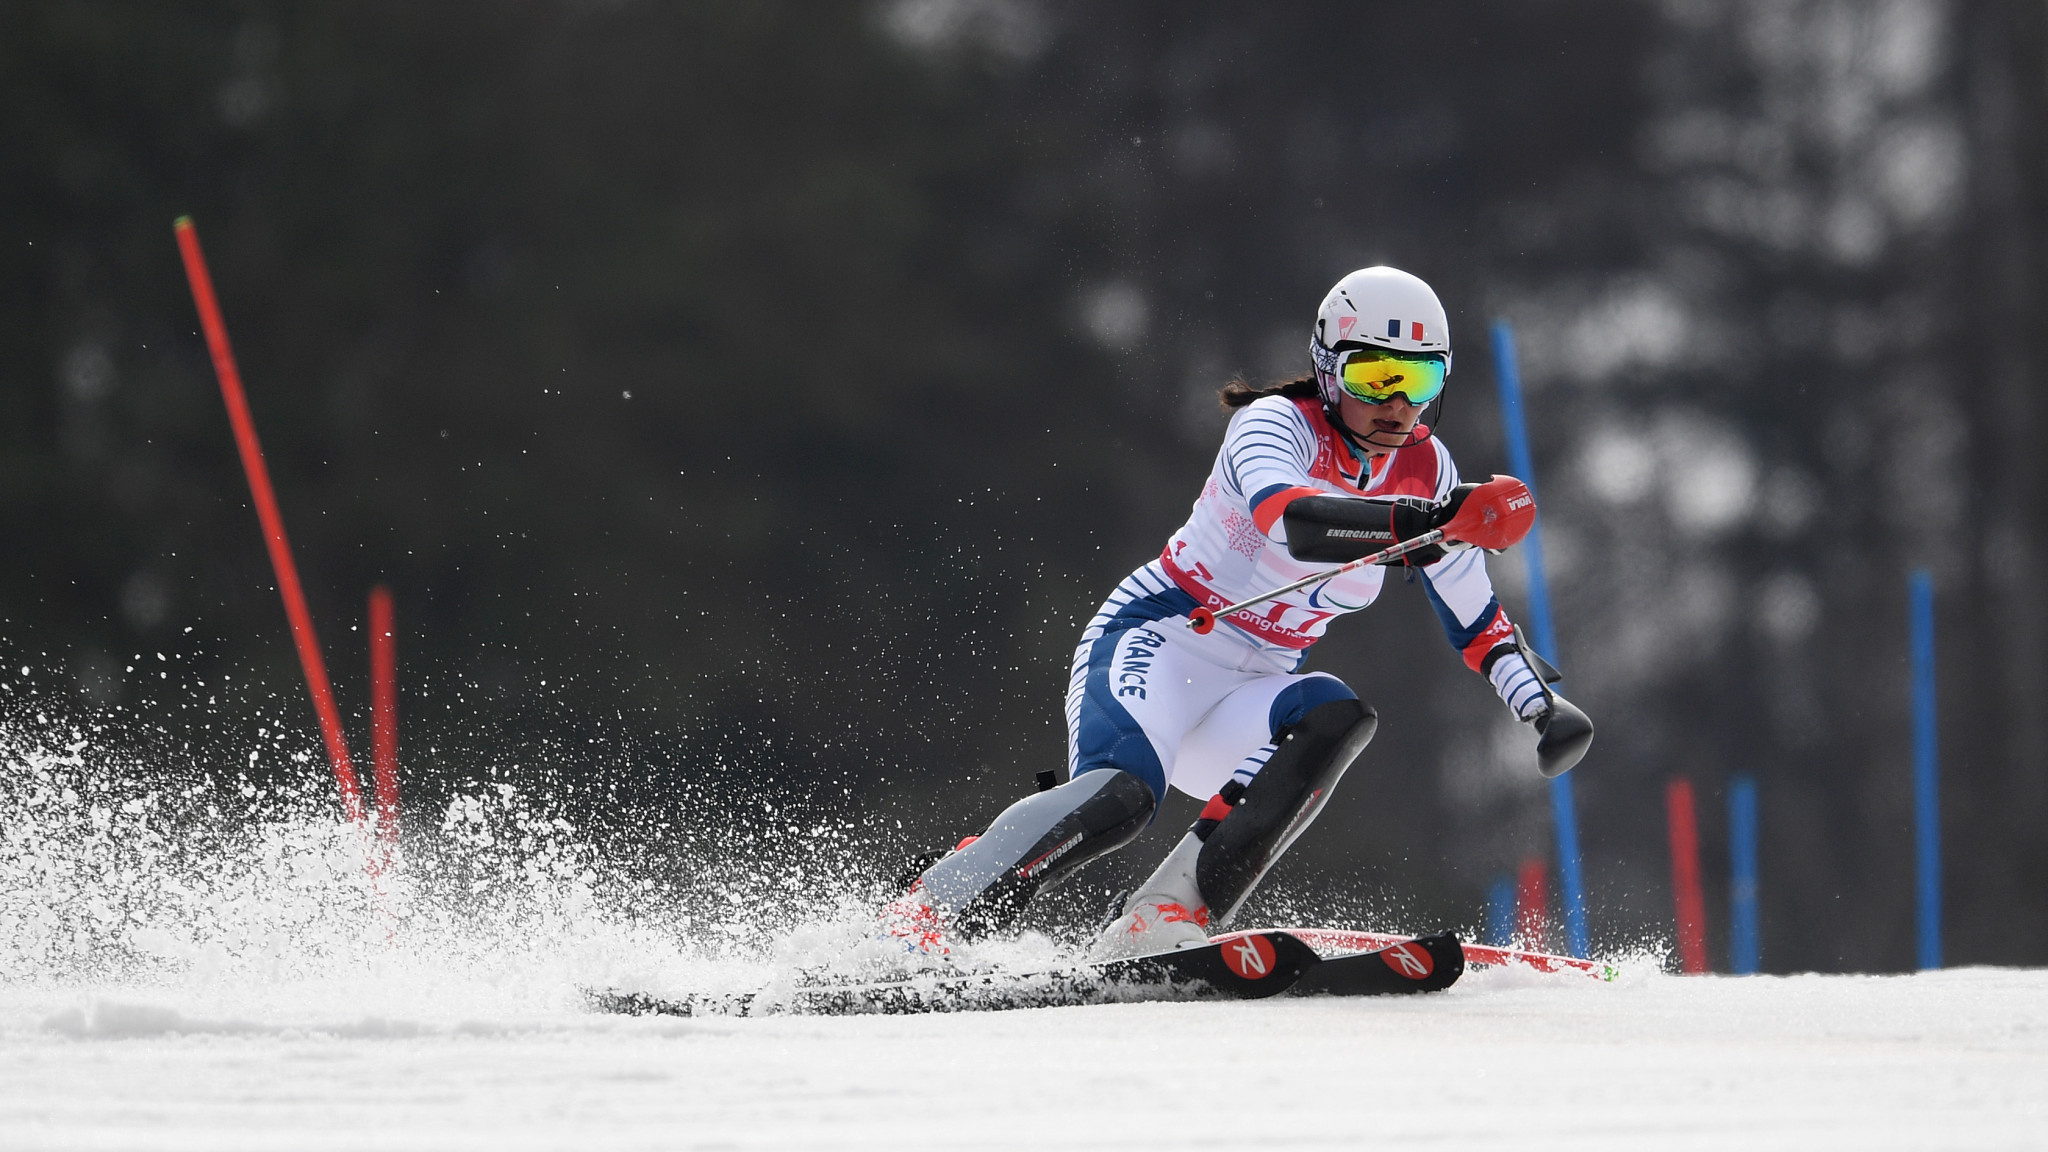 Alpine Skiing: Marie Bochet, Para Alpine Skiing World Cup in St Moritz, Extreme sports. 2050x1160 HD Wallpaper.